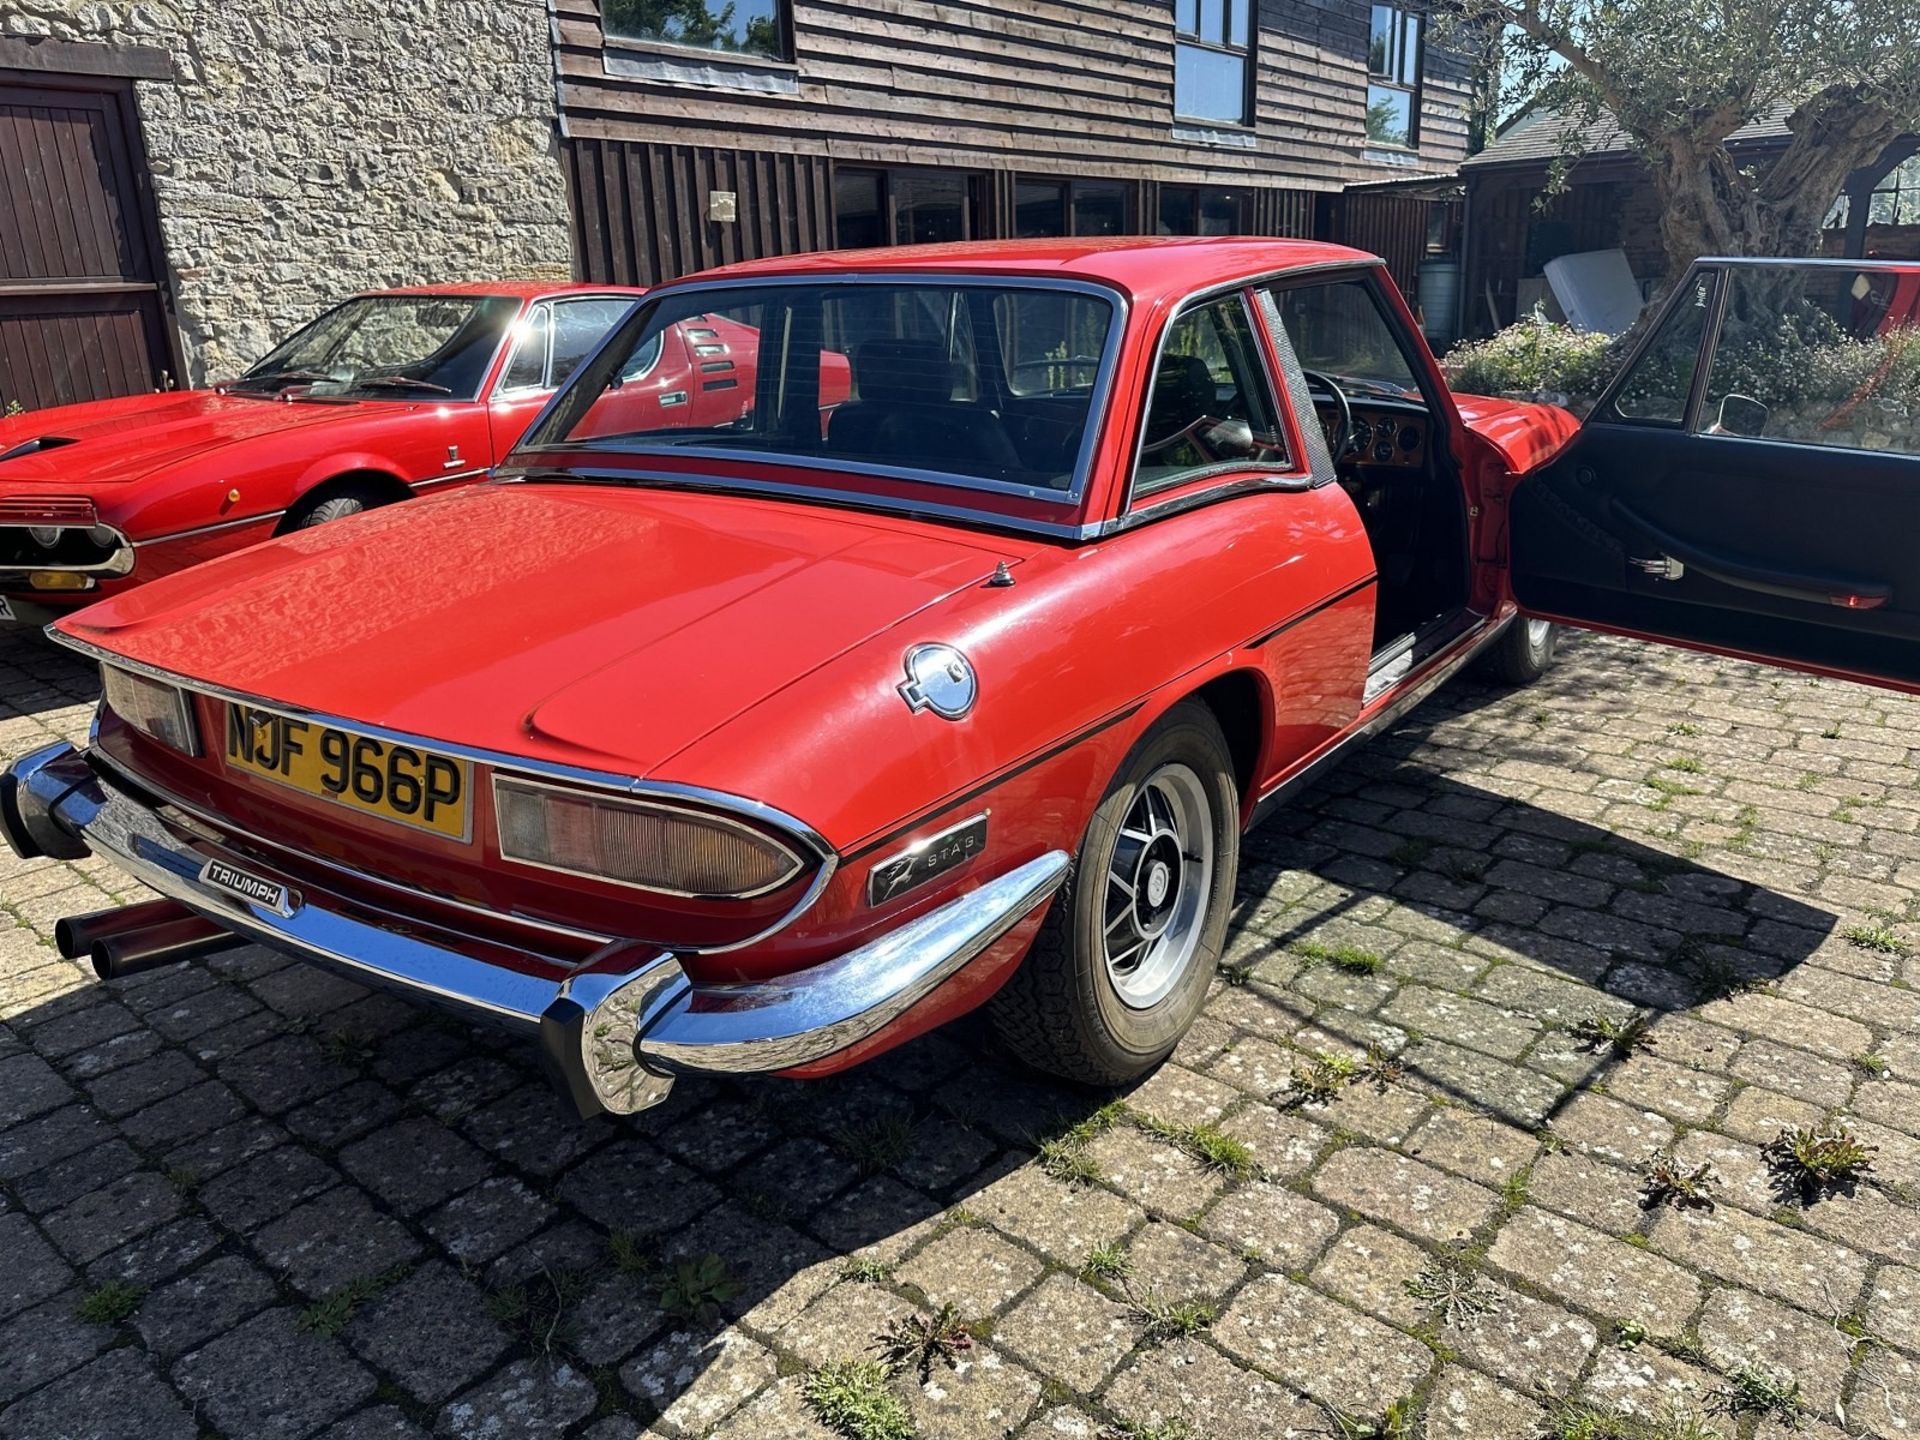 1976 Triumph Stag Registration number NJF 966P Chassis number LD413020 Engine number LF041276HE - Image 2 of 57